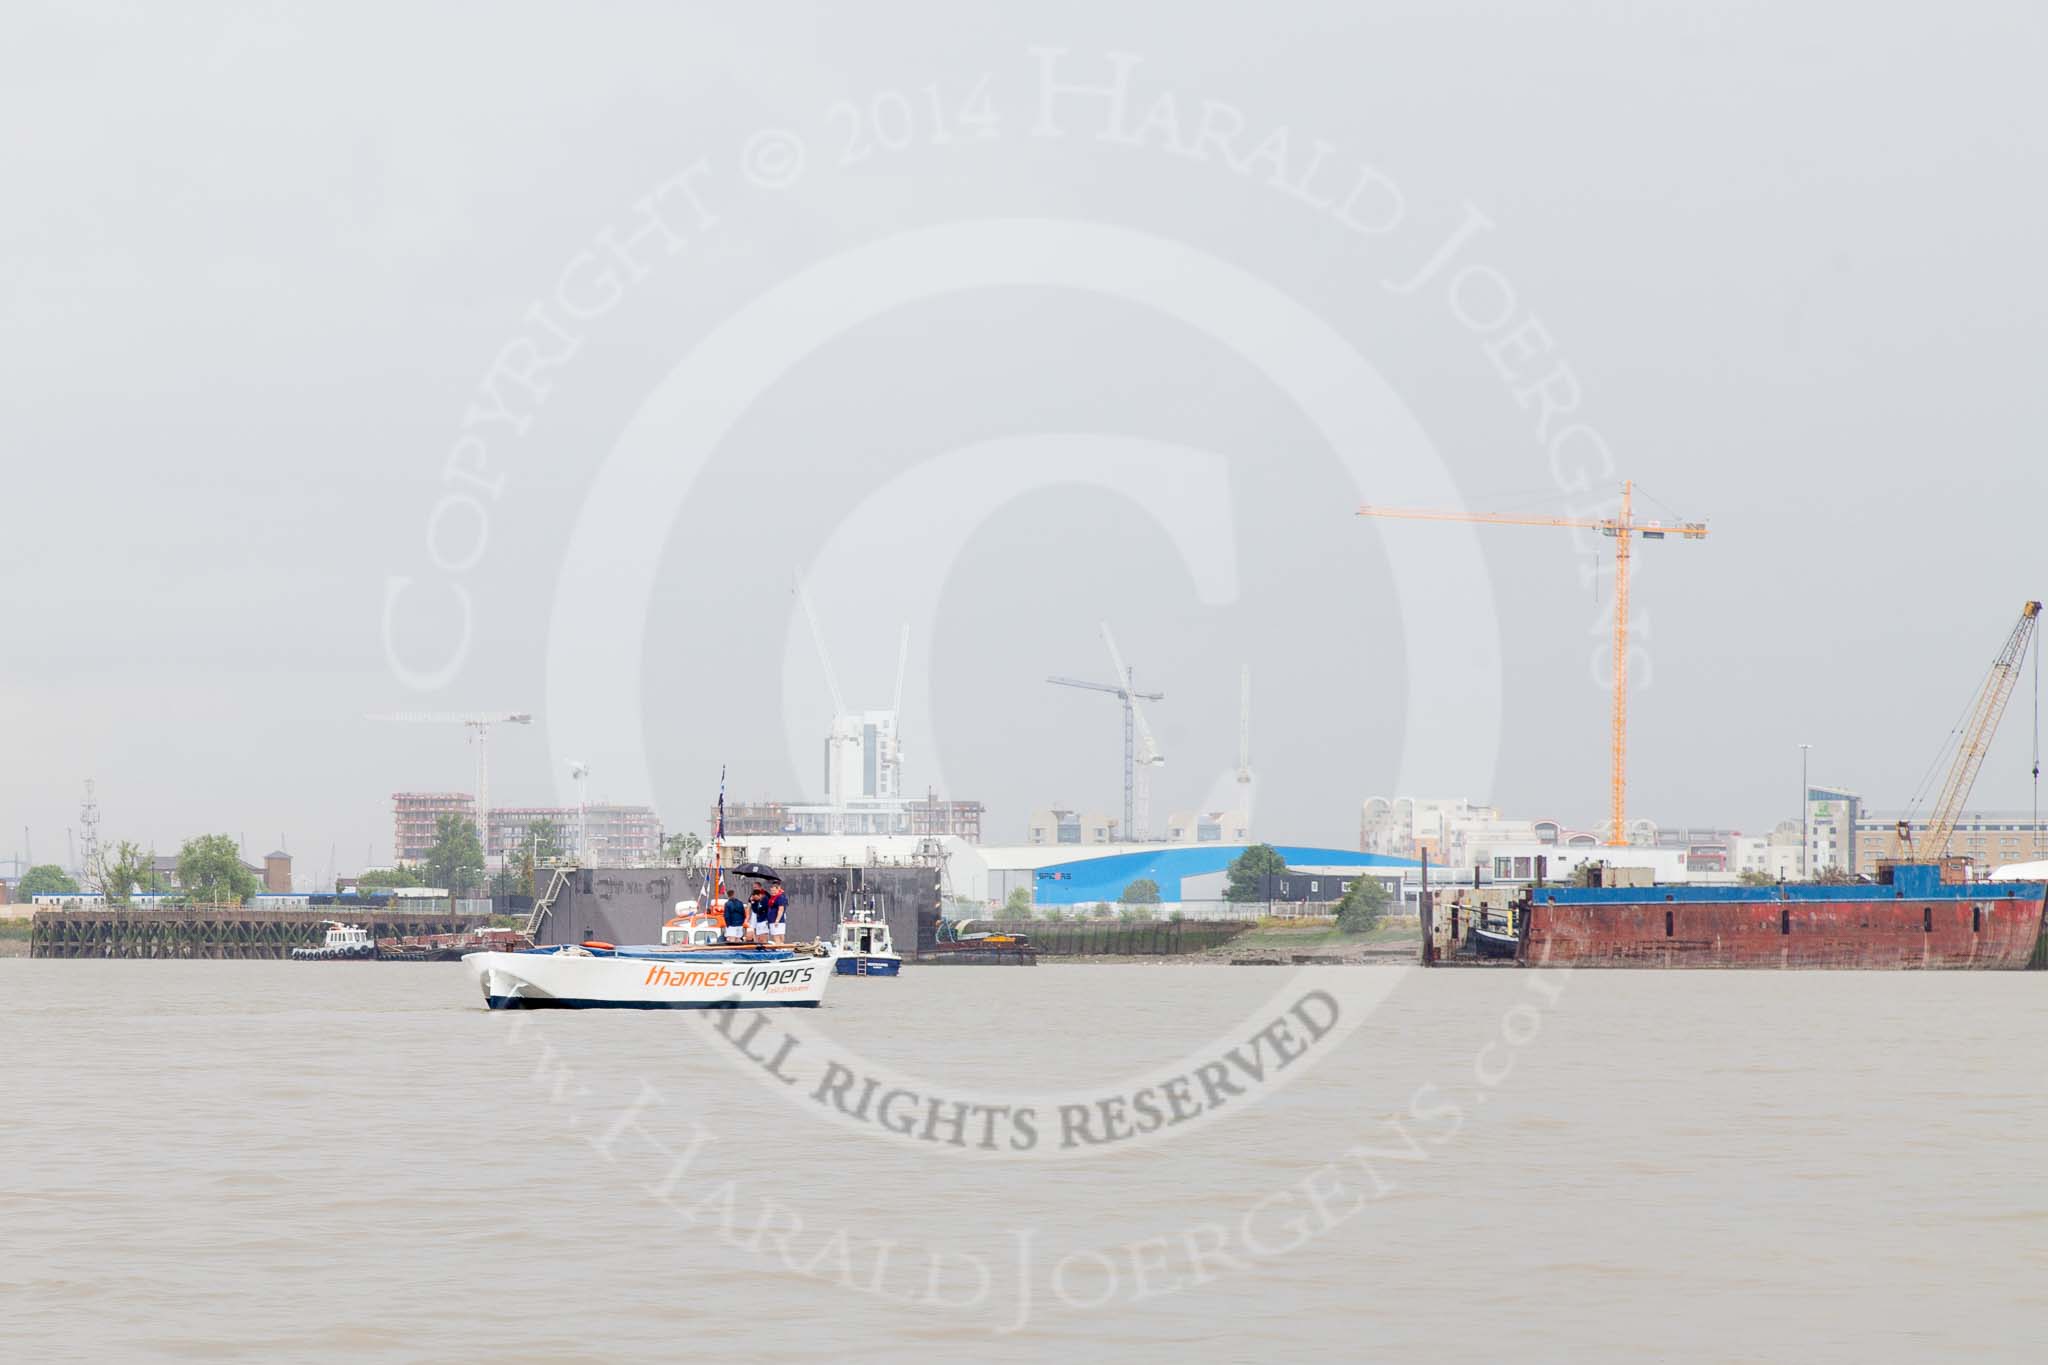 TOW River Thames Barge Driving Race 2014.
River Thames between Greenwich and Westminster,
London,

United Kingdom,
on 28 June 2014 at 11:31, image #18